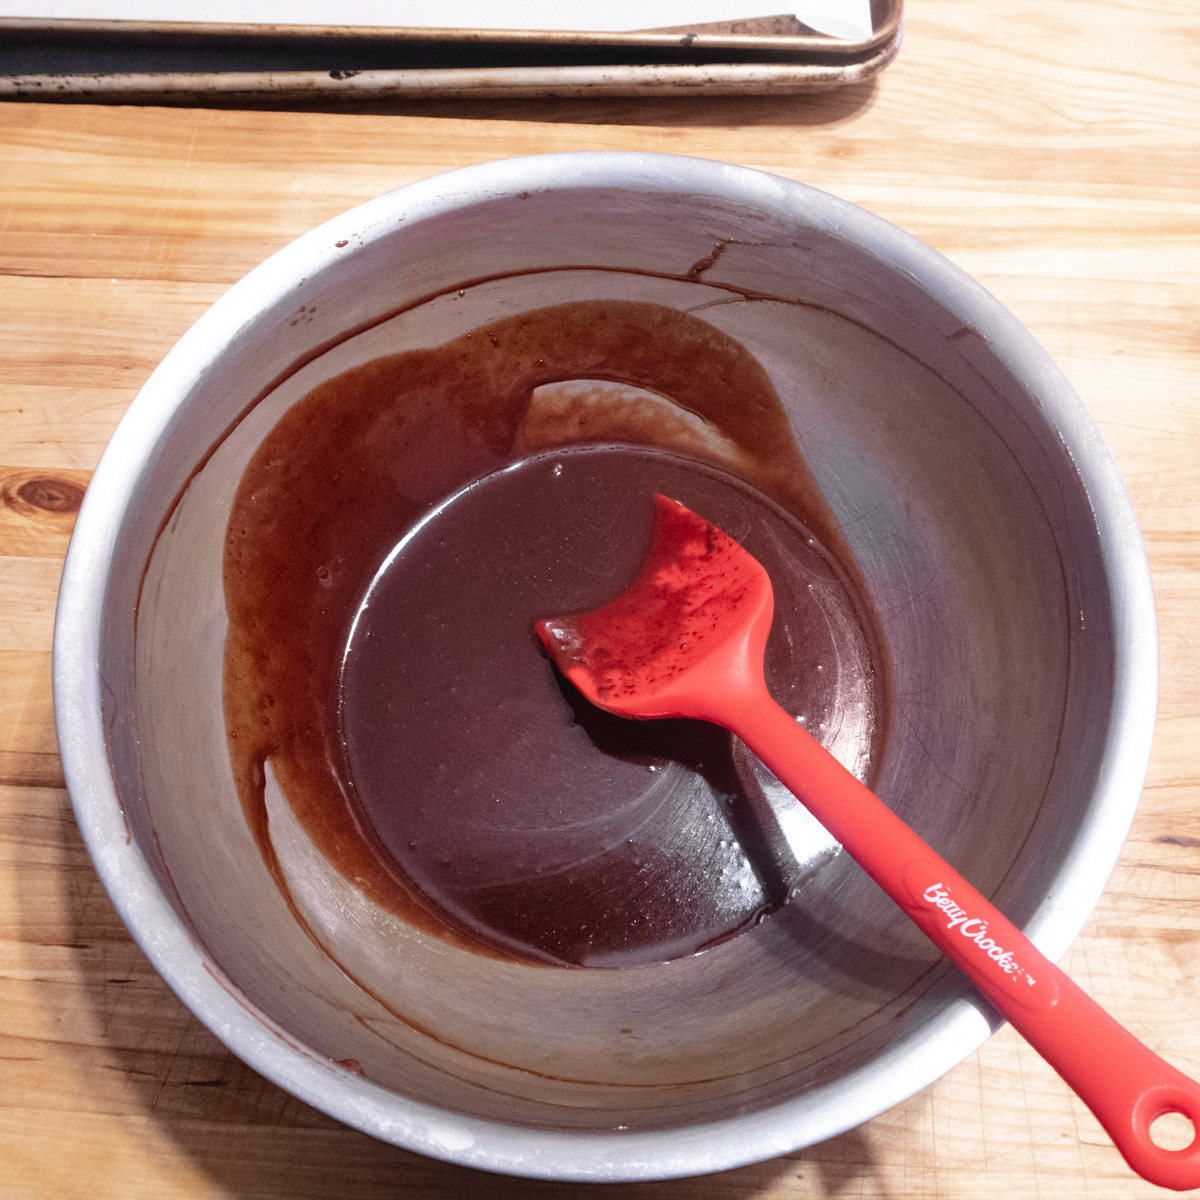 The sugar syrup and chocolate mixture is in a bowl and homogenous.